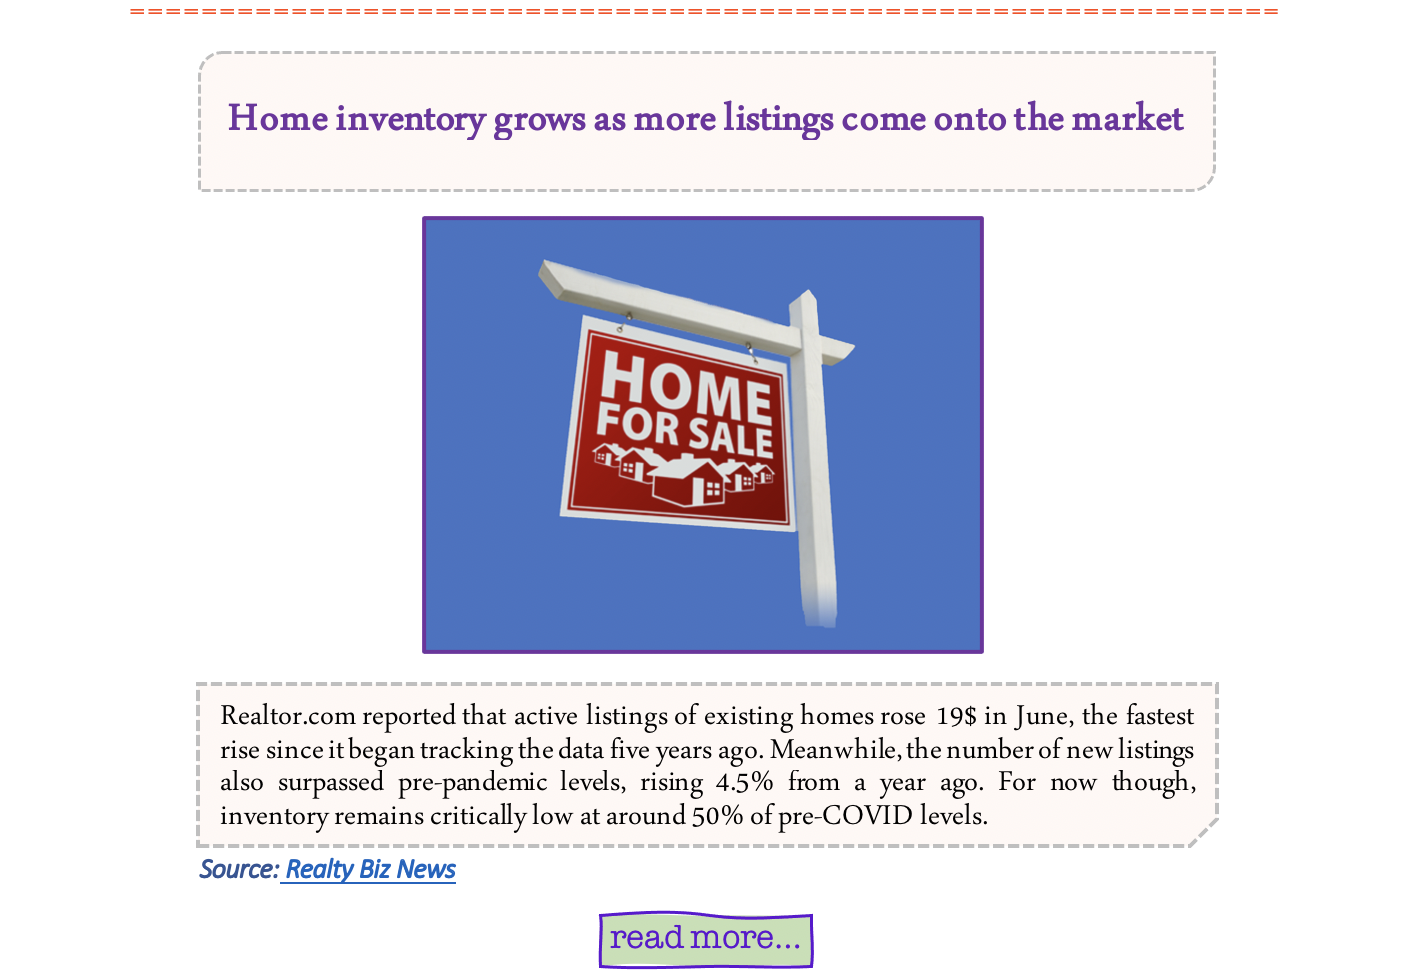 The OC housing market inventory is increasing.